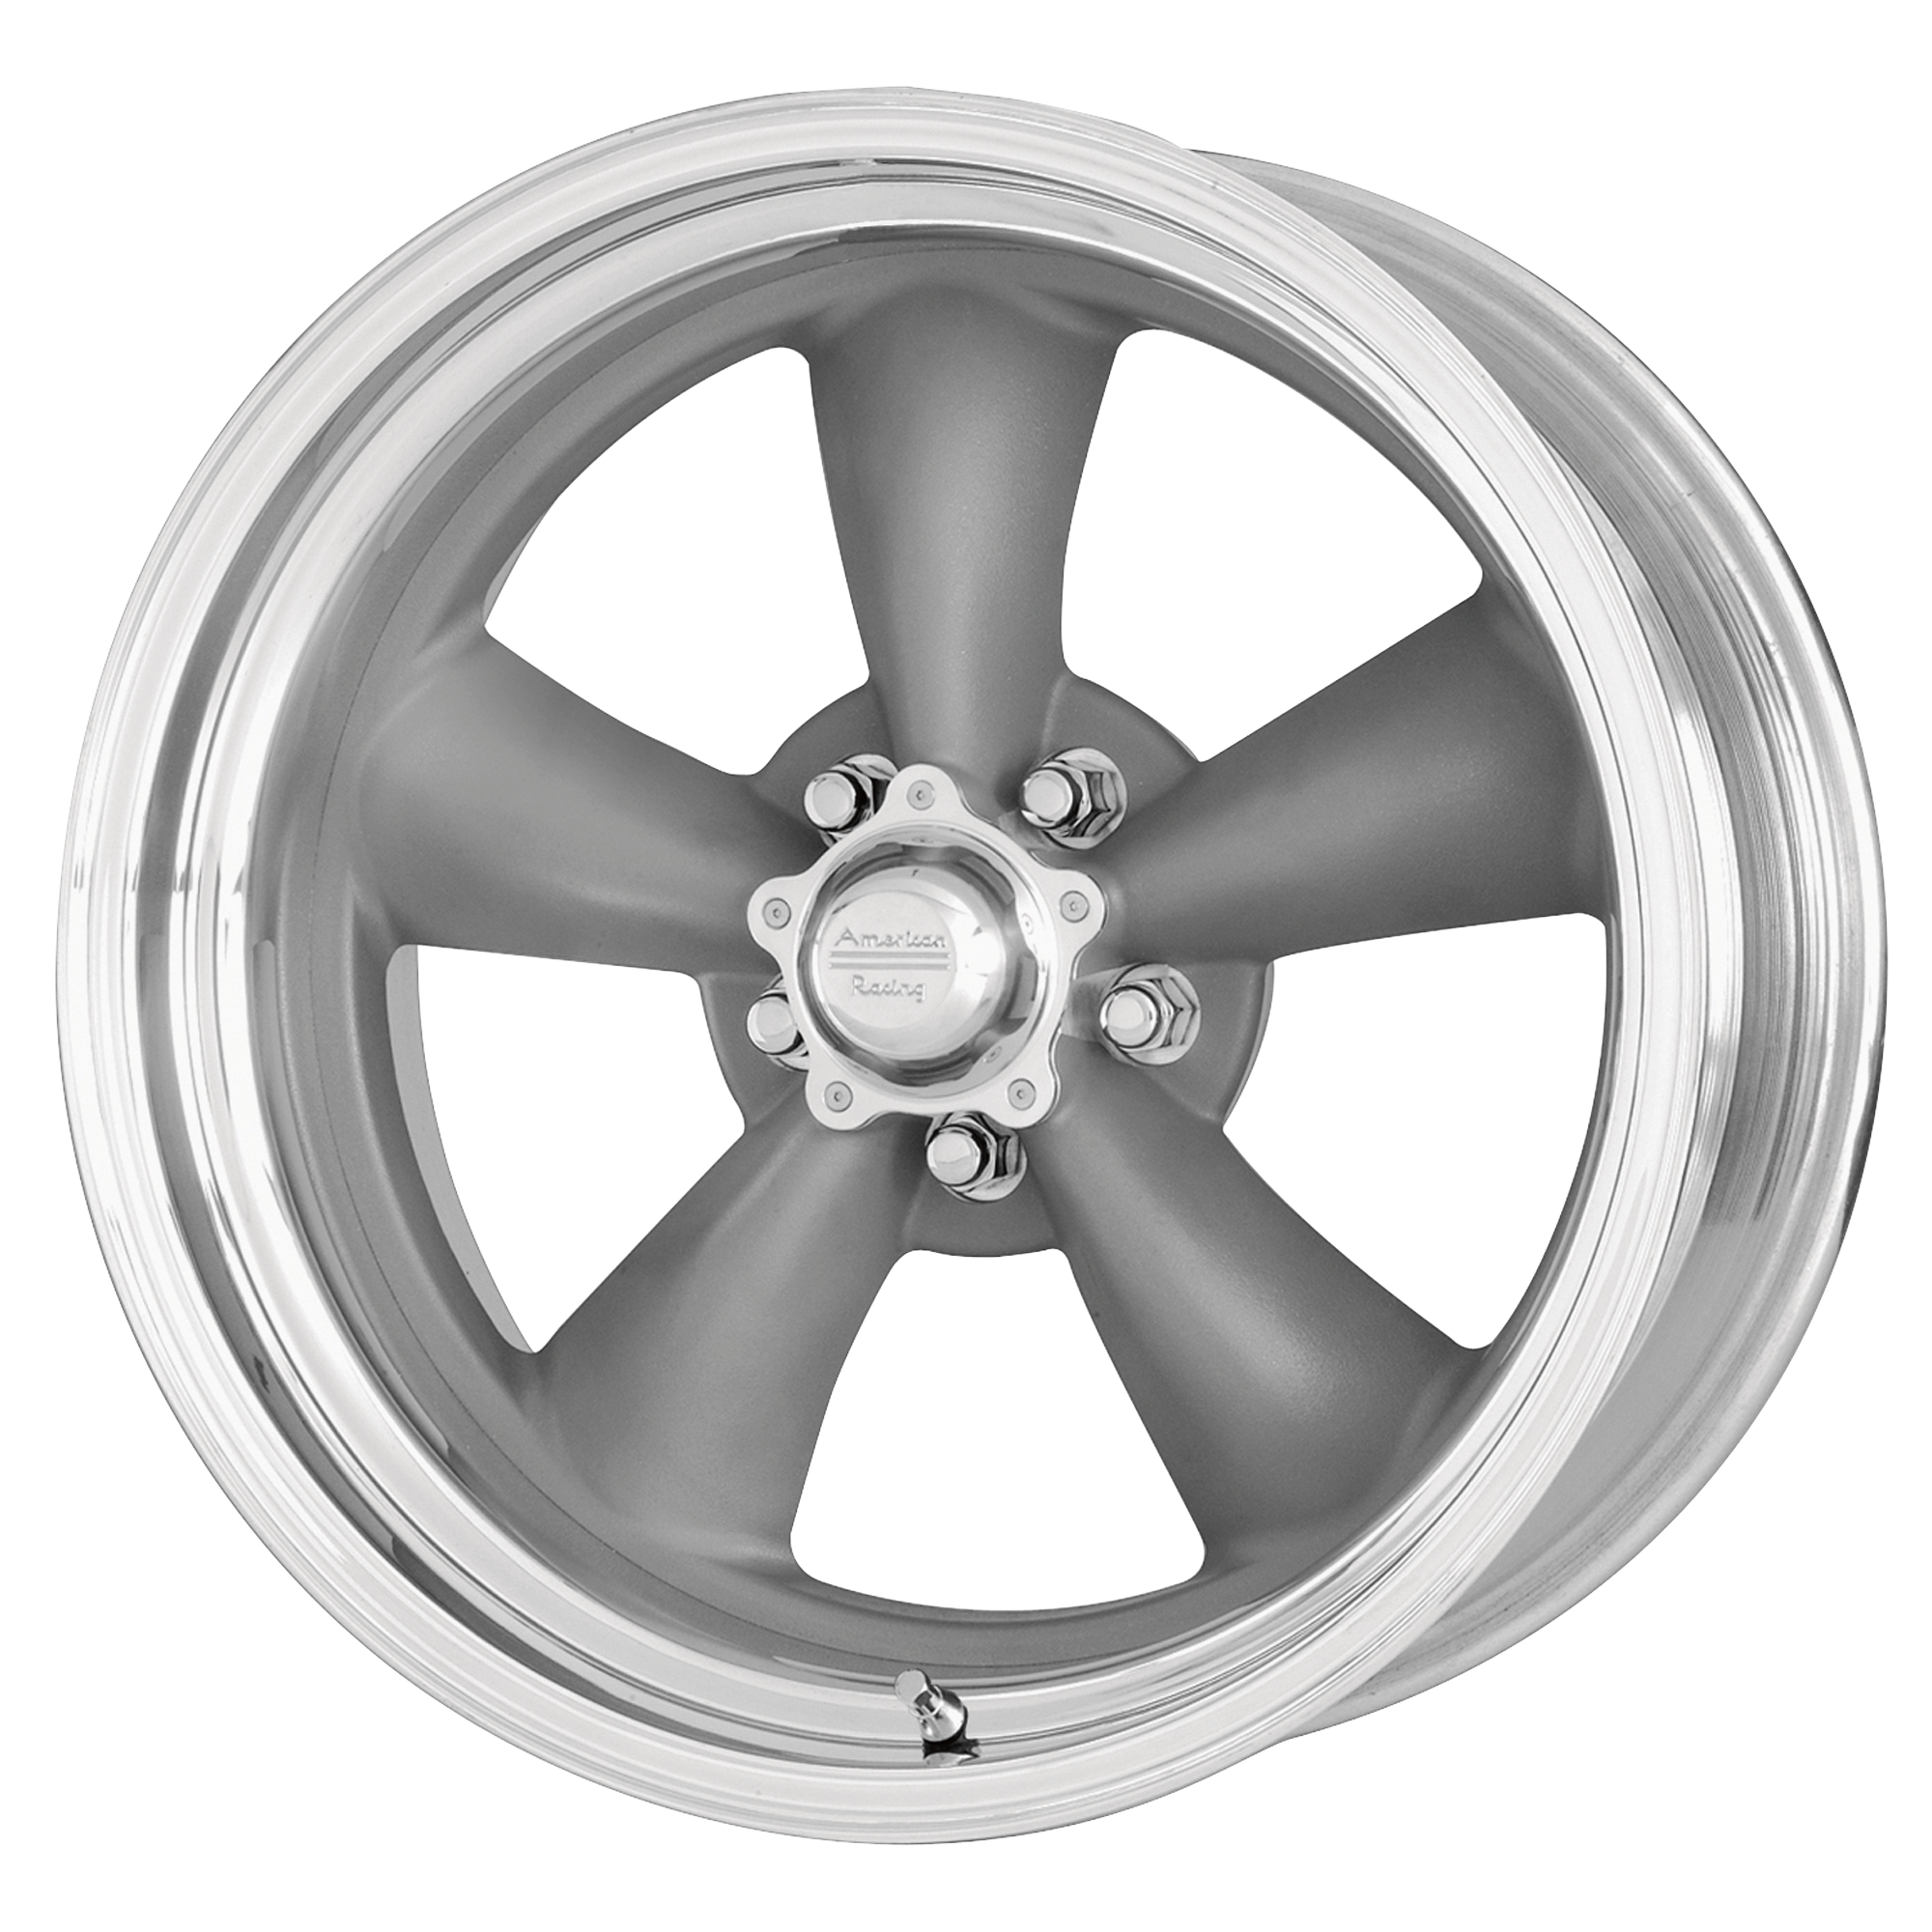 CLASSIC TORQ THRUST II ONE PIECE 17x9.5 5x114.30 MAG GRAY W/ MACHINED LIP (8 mm) - Tires and Engine Performance